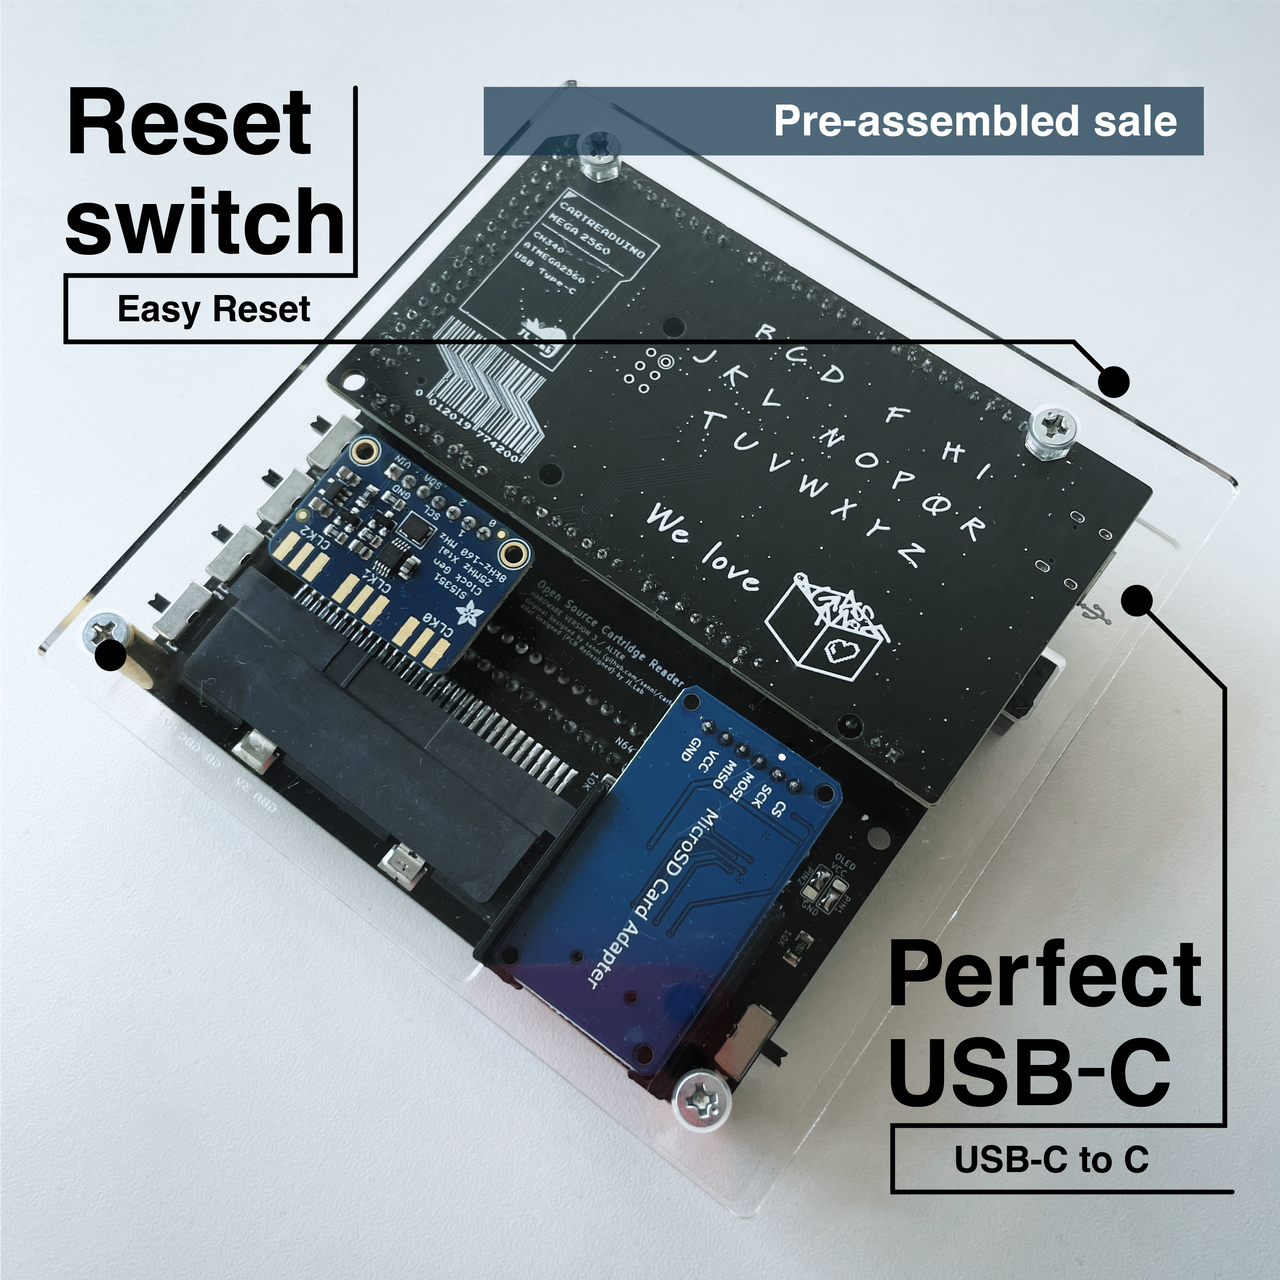 Perfect USB-C Arduino Mega *Only with Cartridge Reader V3-ALTER build service